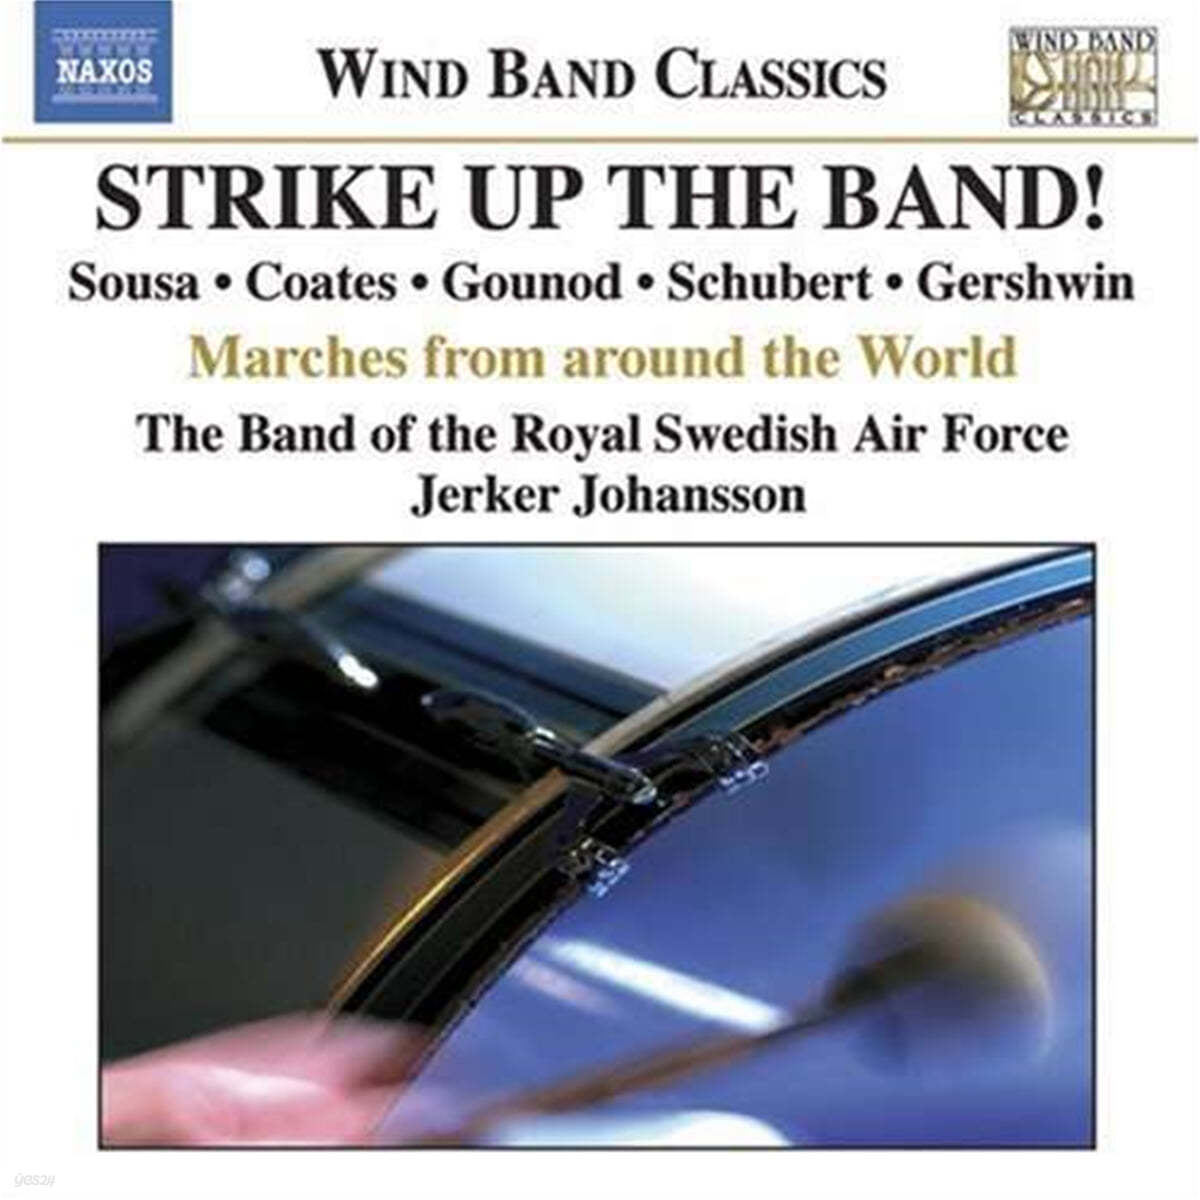 The Band of the Royal Swedish Air Force 행진곡 모음집 (Strike Up The Band! - Marches from Around The World)